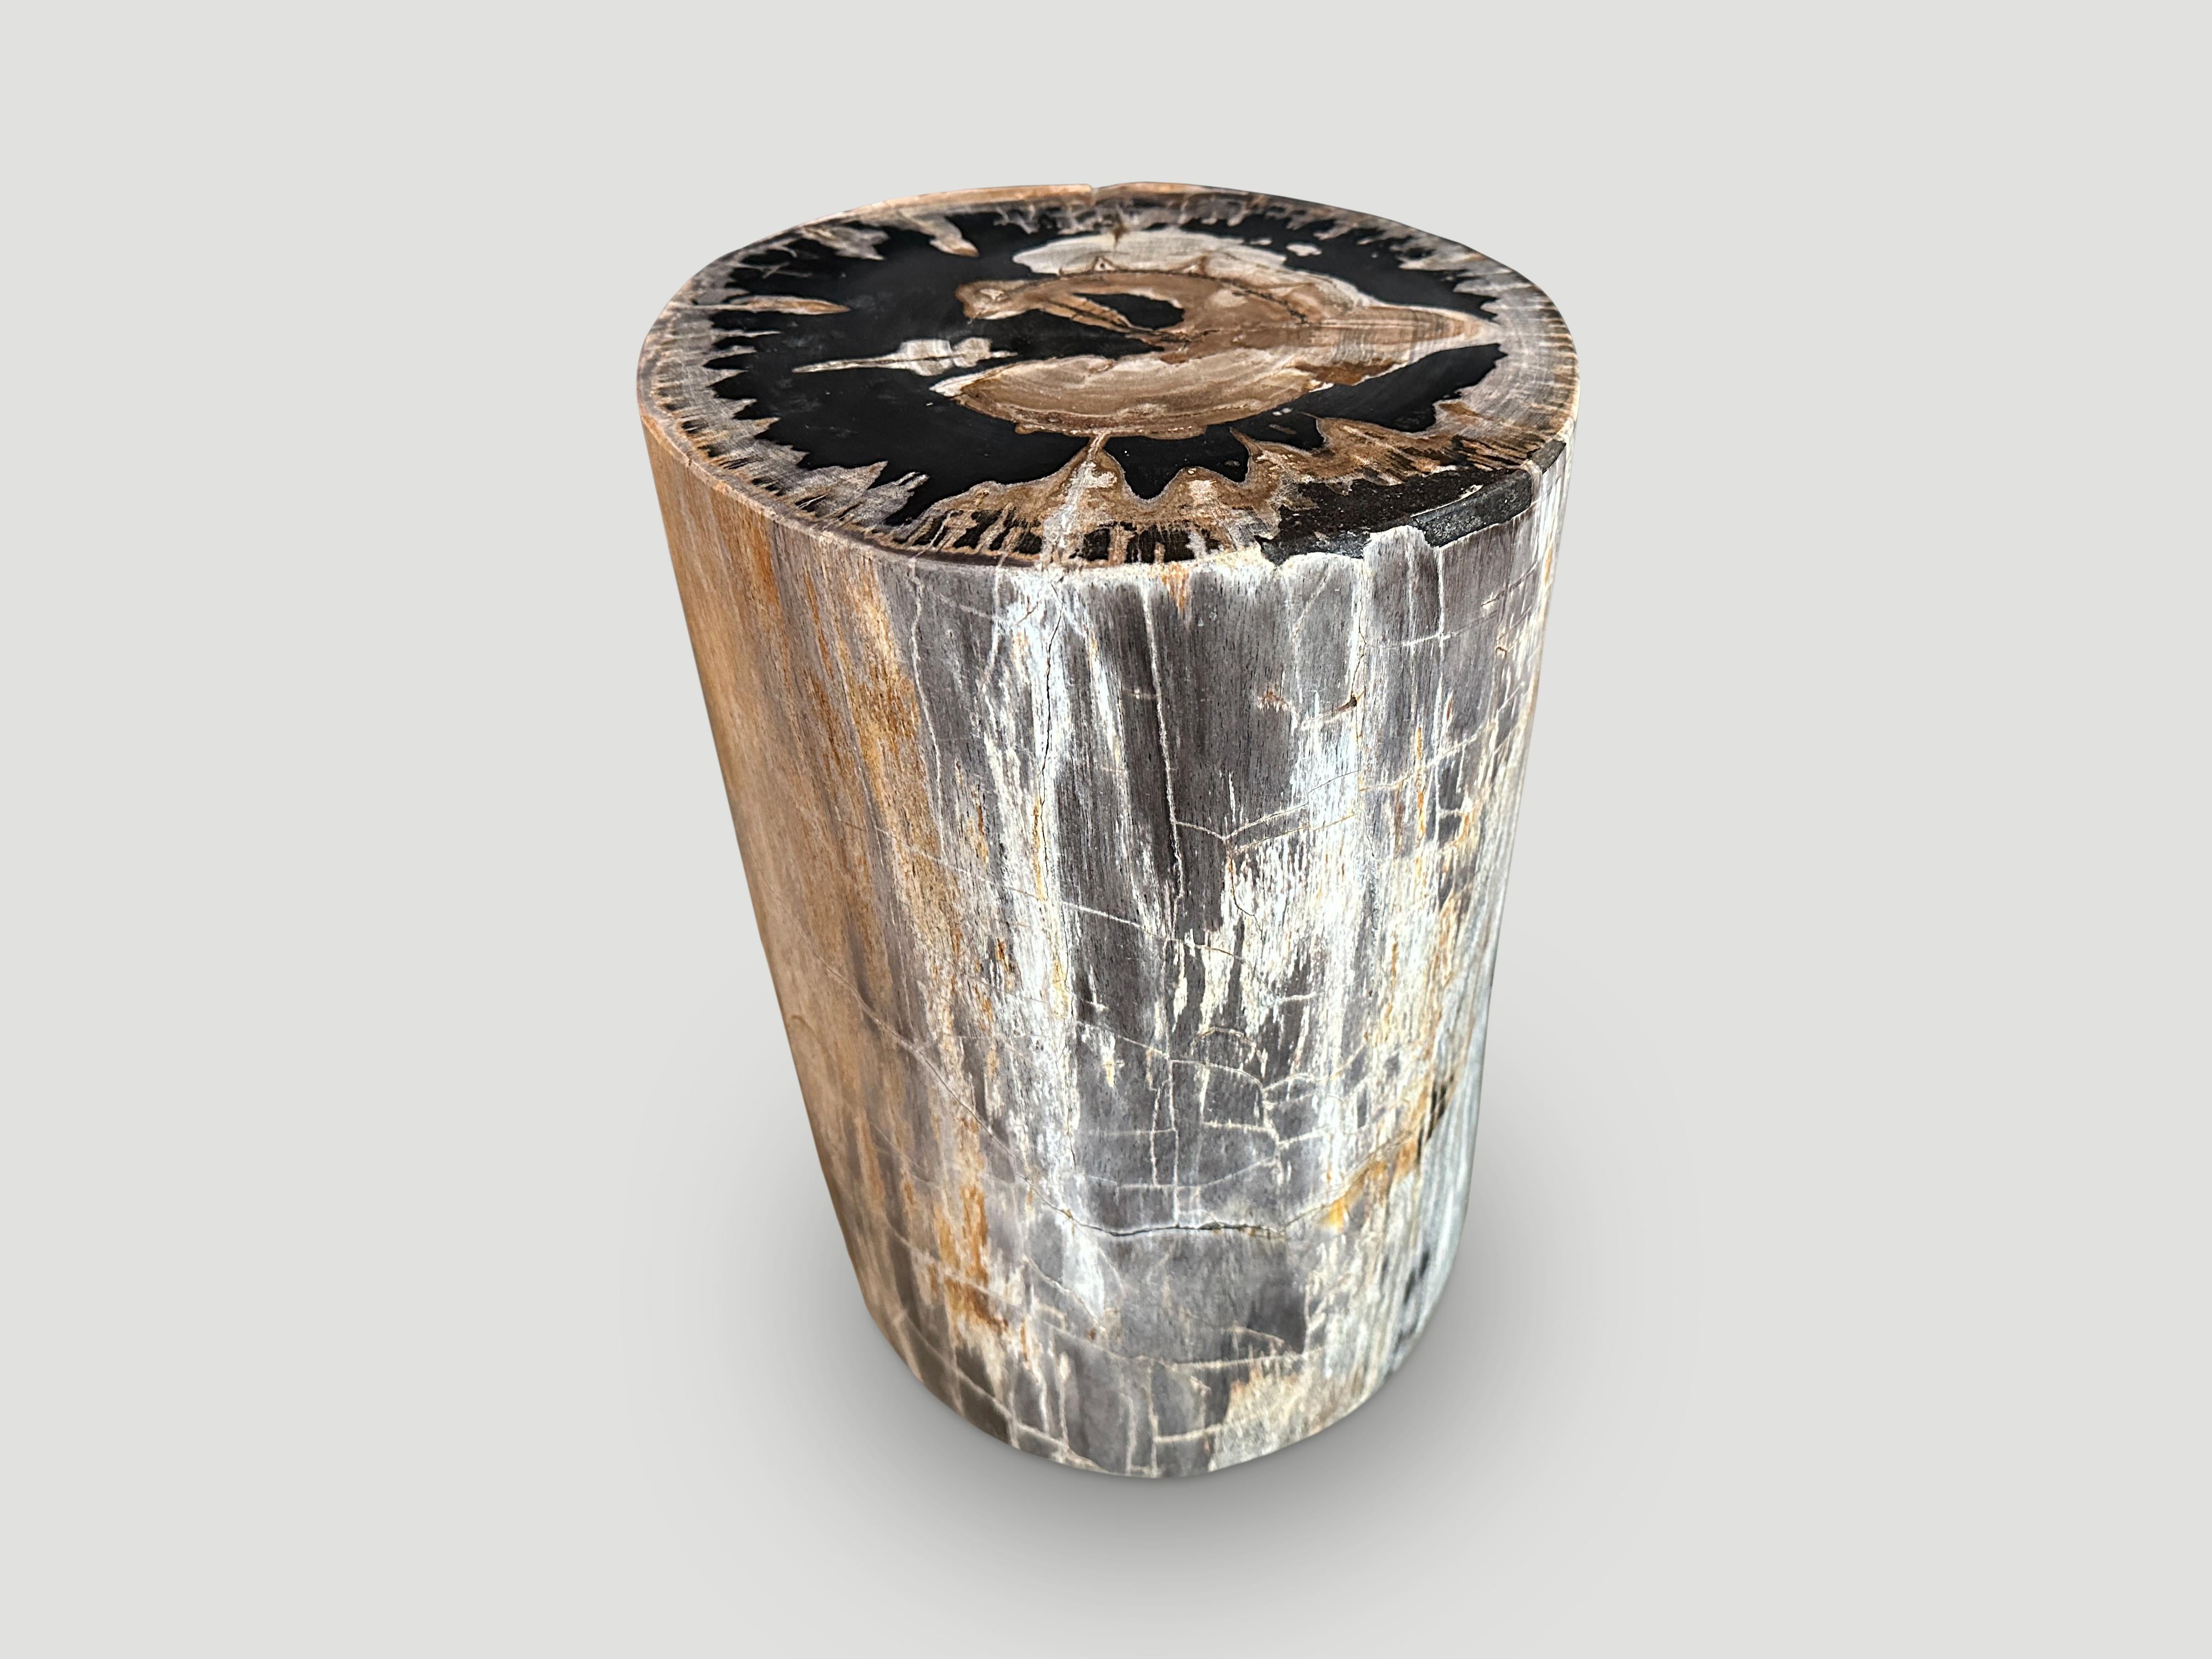 Beautiful tones and markings on this high quality petrified wood side table. It’s fascinating how Mother Nature produces these exquisite 40 million year old petrified teak logs with such contrasting colors and natural patterns throughout. Modern yet